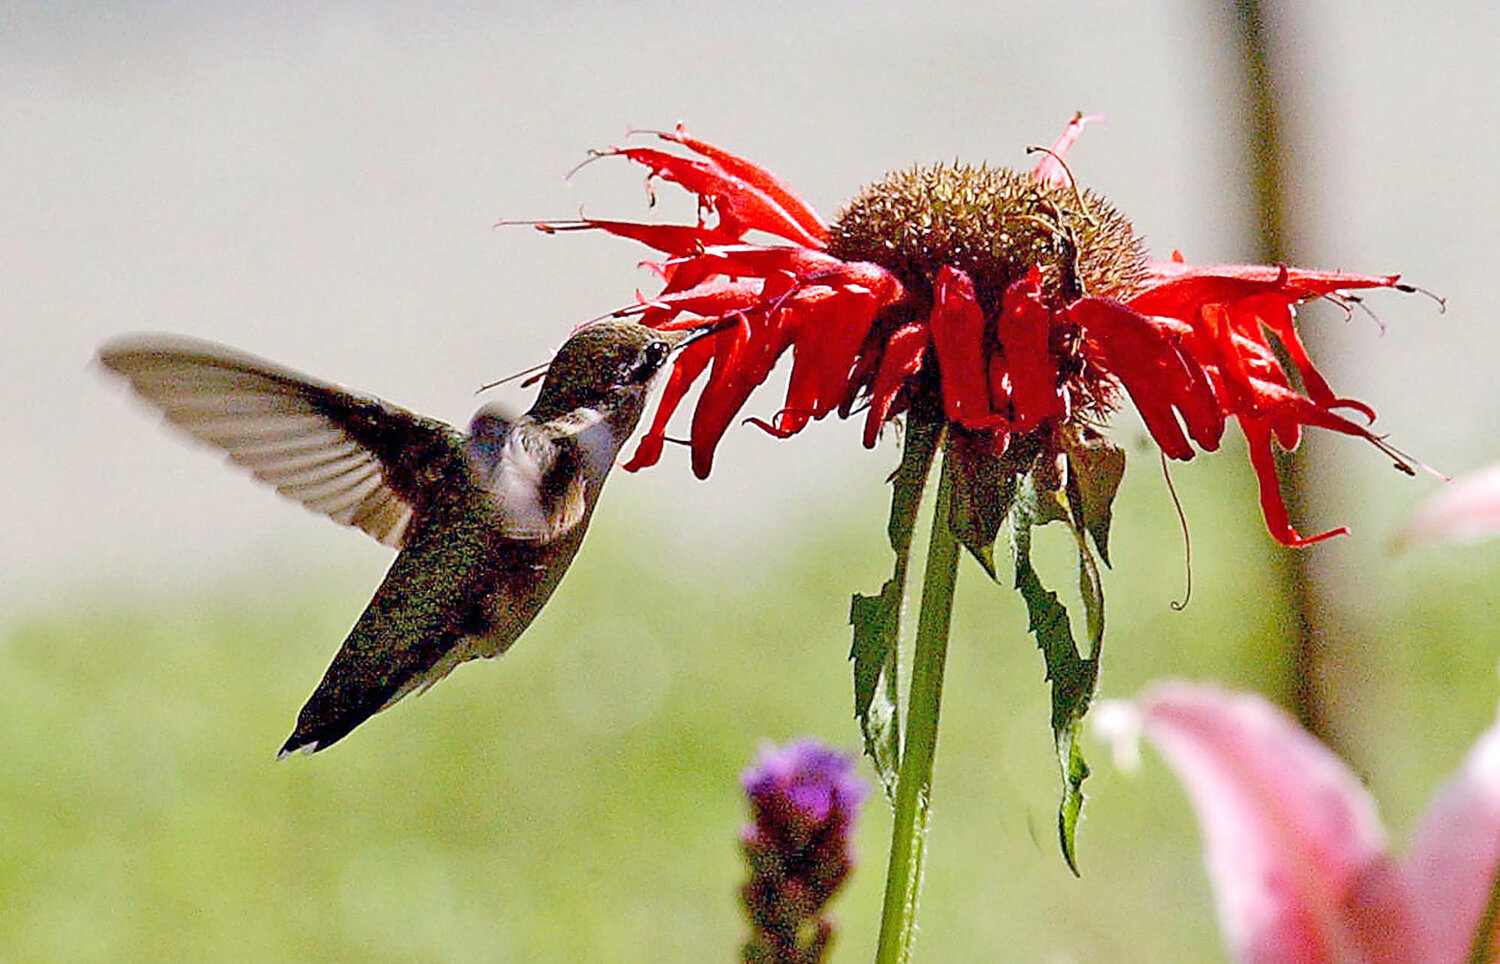 A Ruby-throated hummingbird investigates a Bee Balm flower in AuSable Forks, New York.